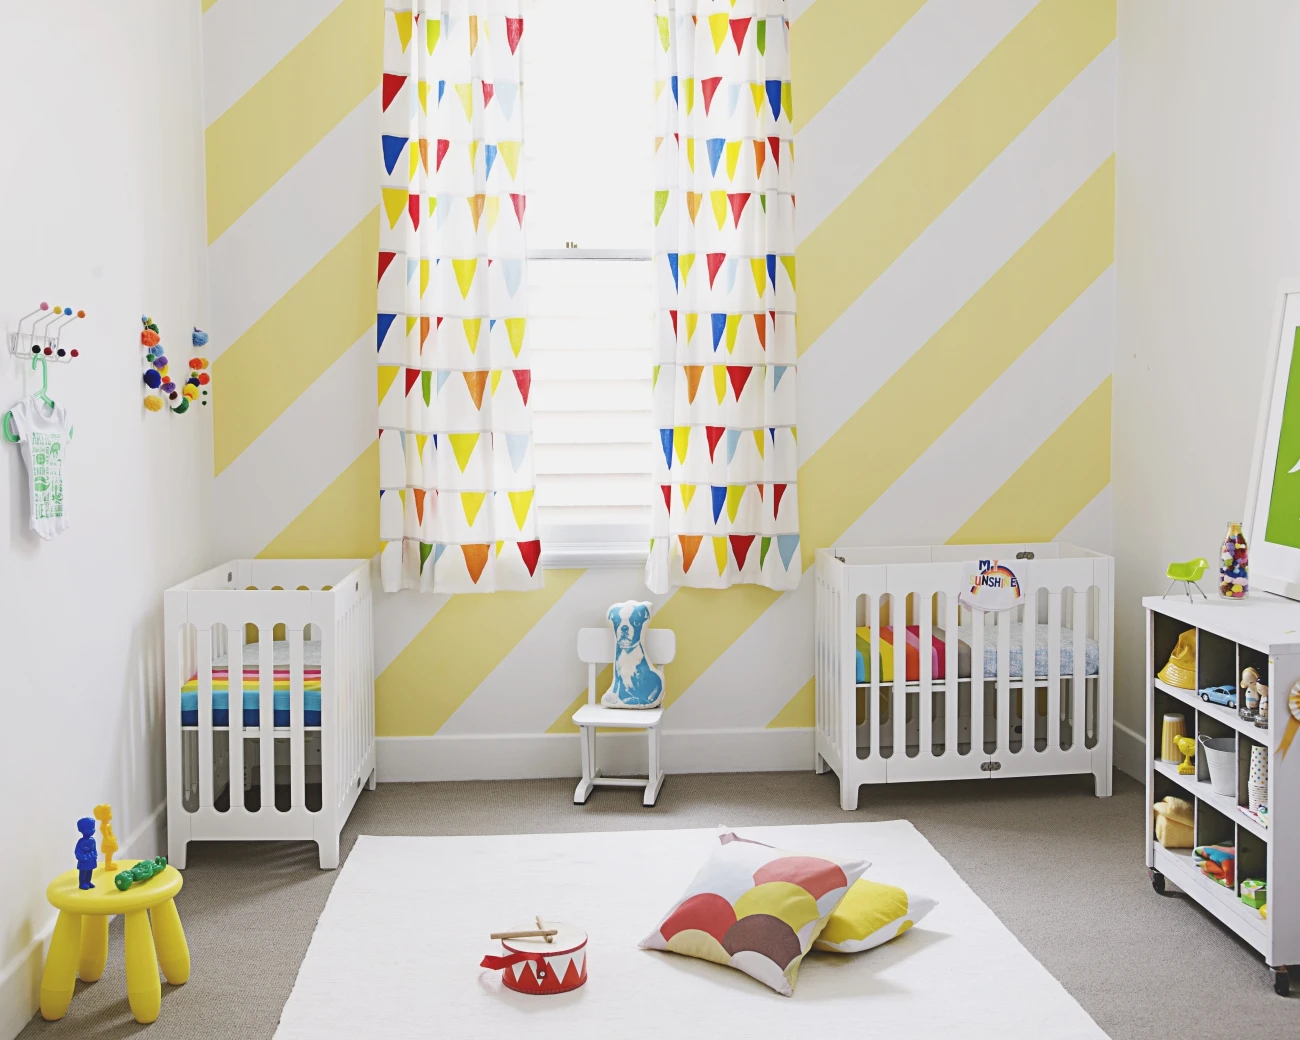 Add some excitement with fresh yellows and pale buttery hues which can be perfect for a child's bedroom or play area. ‘Mustard’ by Stacey Rees, Modern Times; ‘Sculpture 13 ‘ by Mark Alsweiler, Modern Times. 